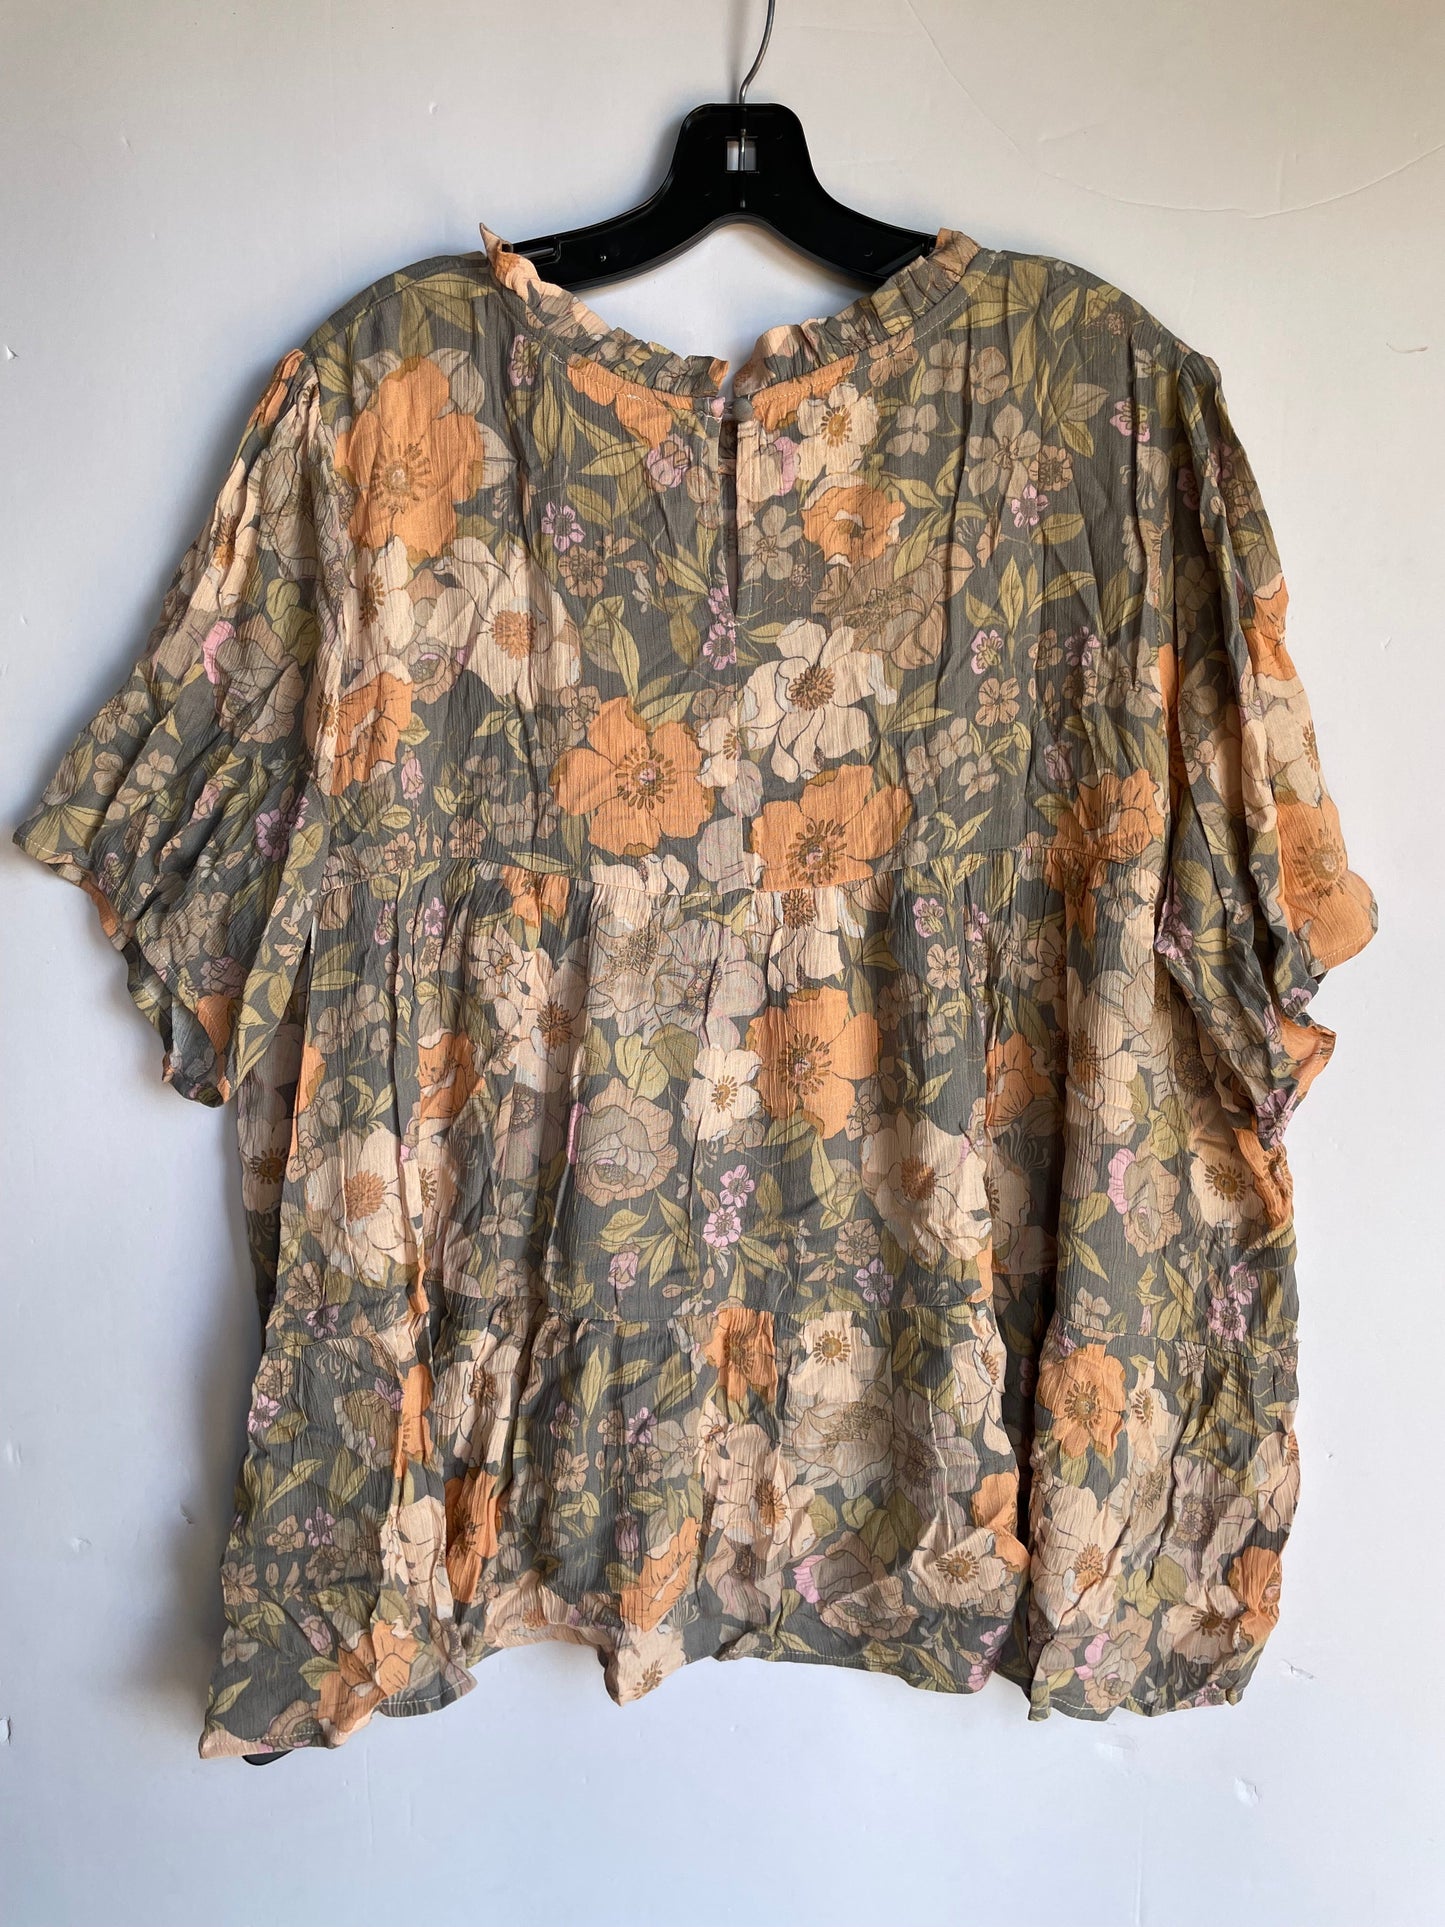 Floral Print Top Short Sleeve Clothes Mentor, Size 3x